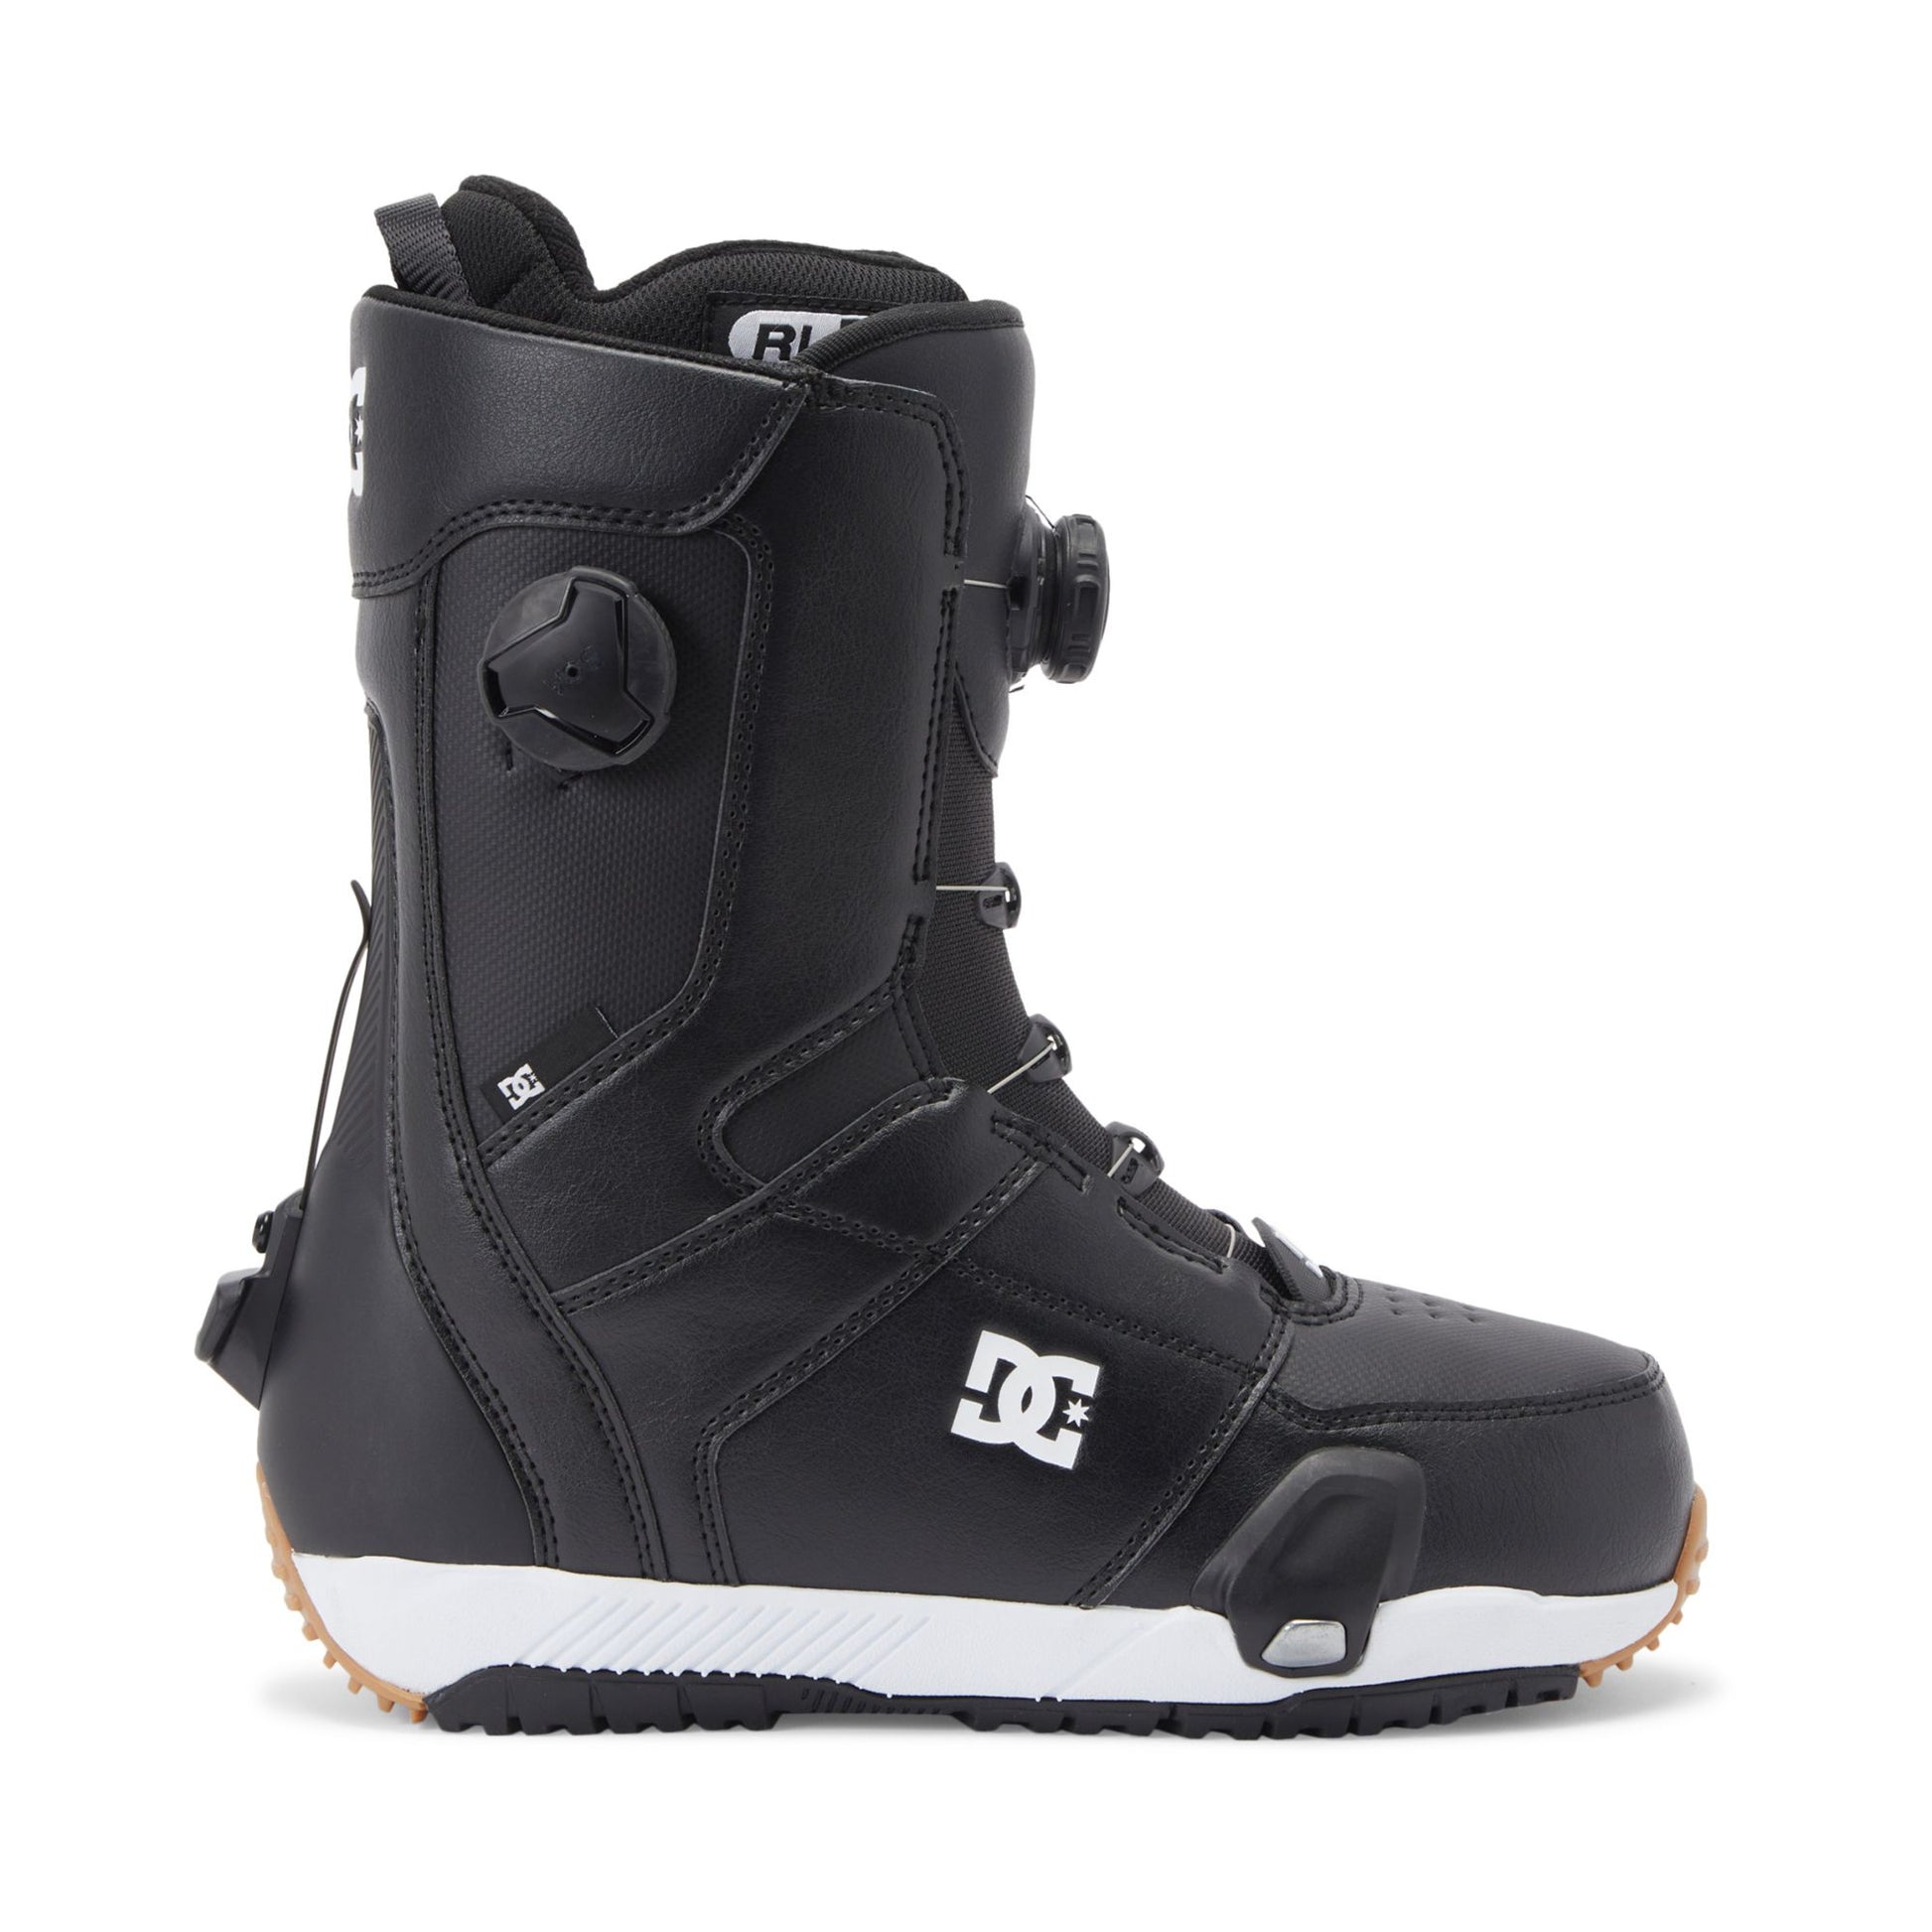 Step Boots – DC On BOA Control Snowboard